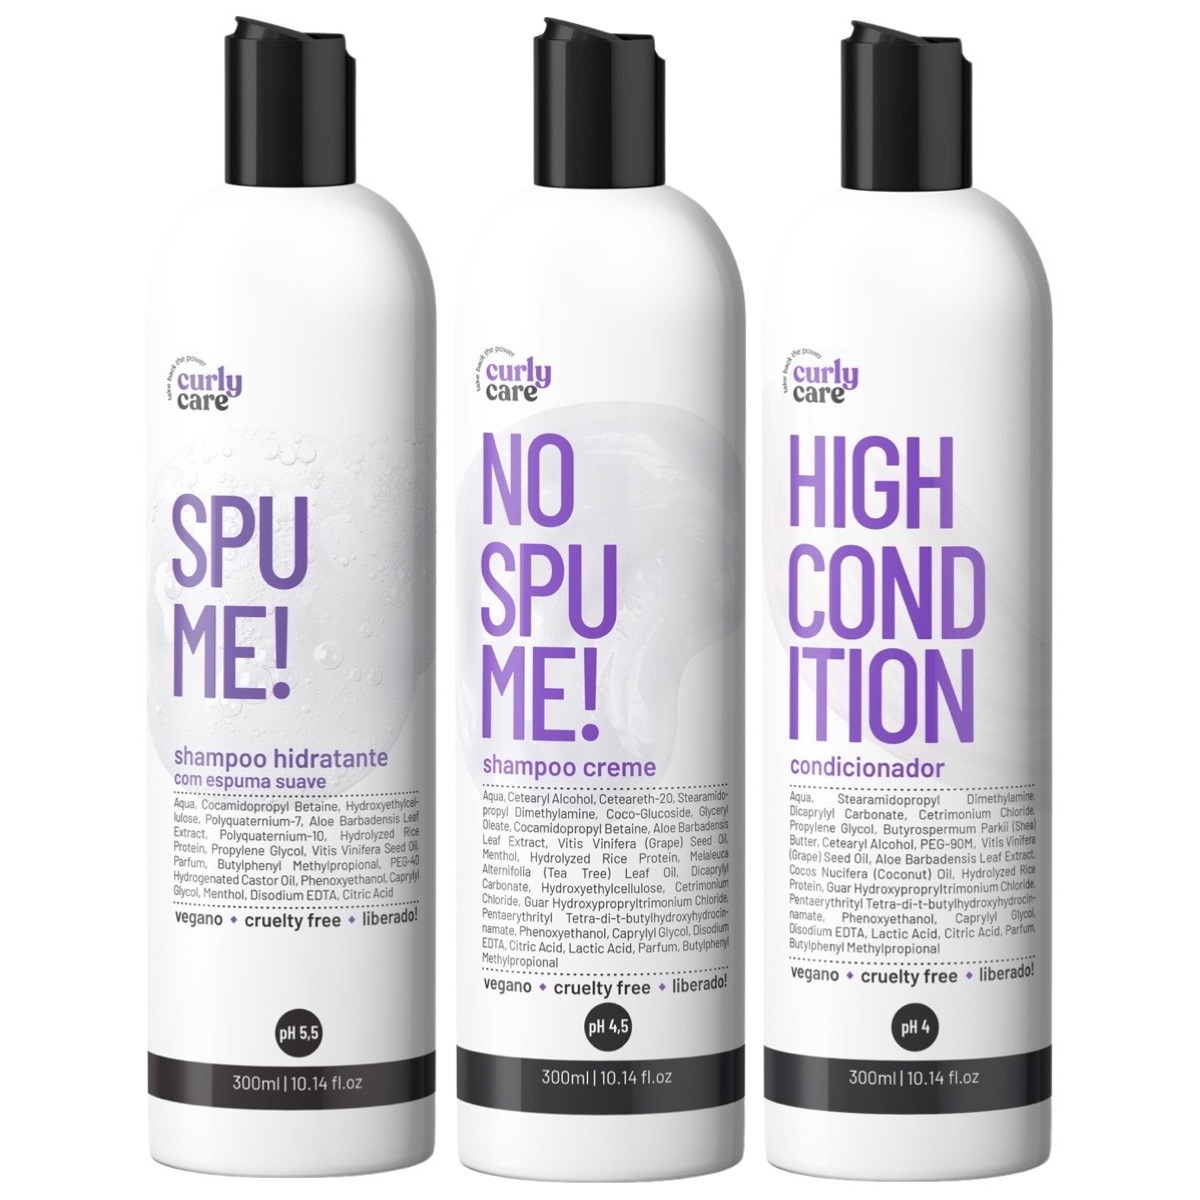 Kit Curly Care Spume, No Spume e High Condition 3x300ml